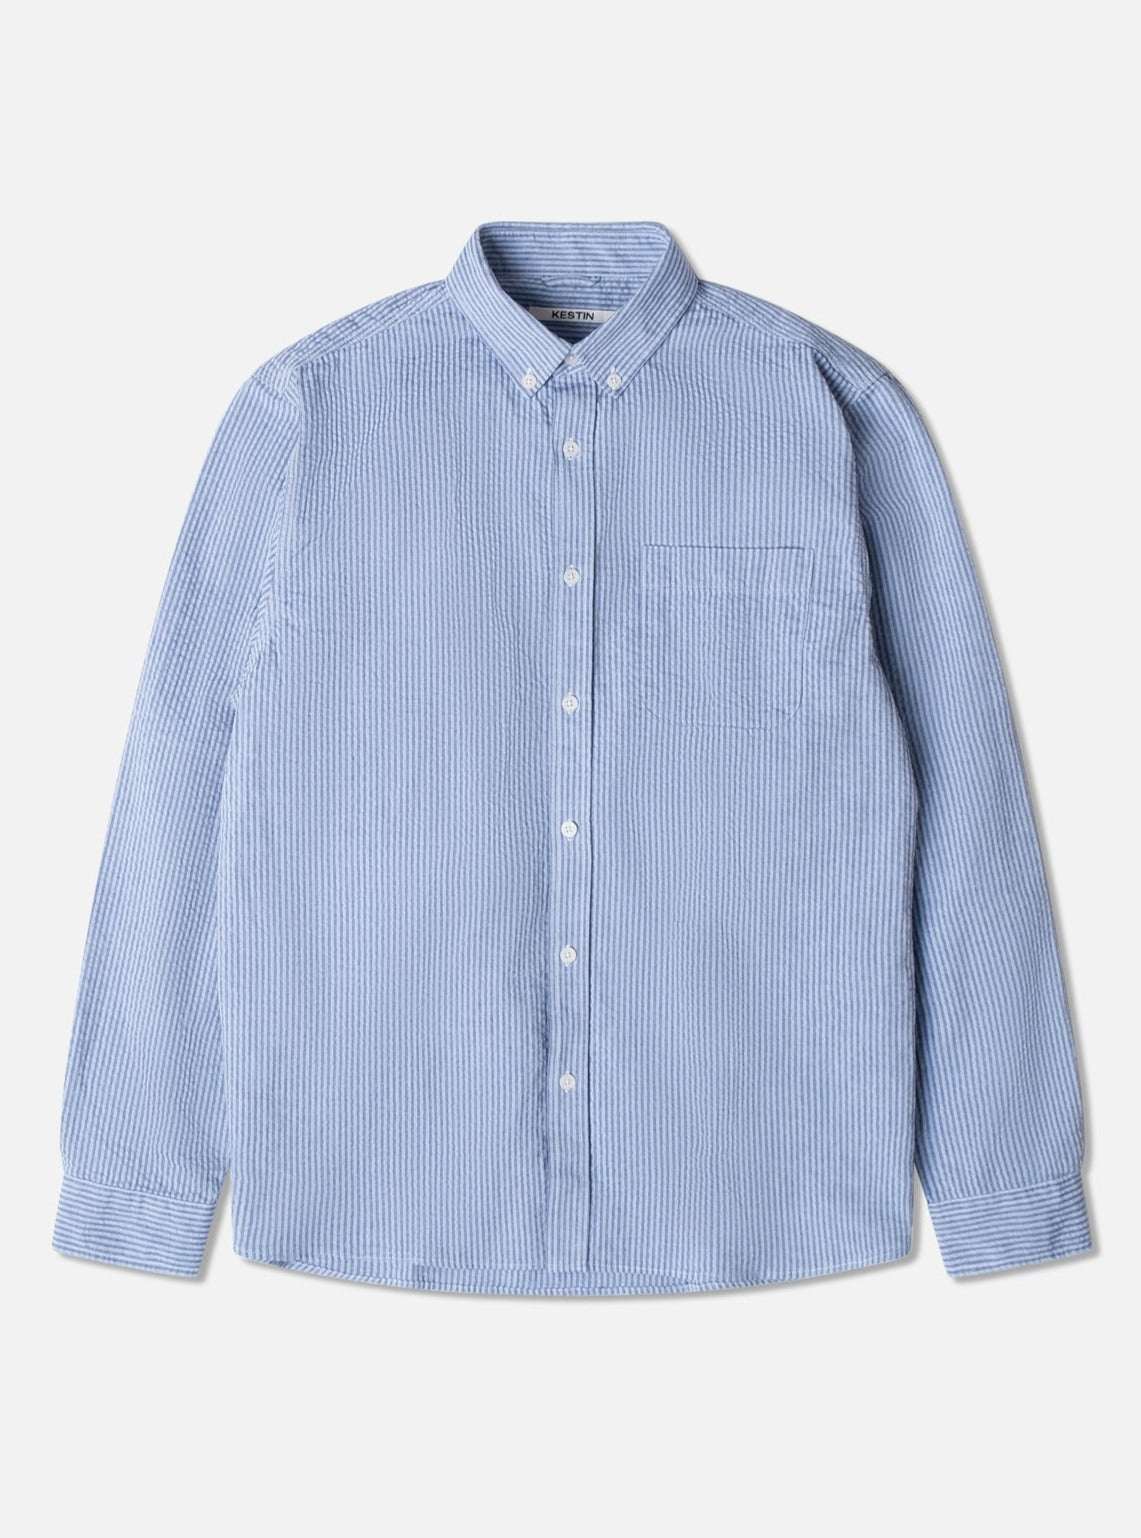 This is a long sleeve shirt by designer menswear brand KESTIN. The Raeburn Button Down Shirt is made from a traditional striped Cotton Seersucker.